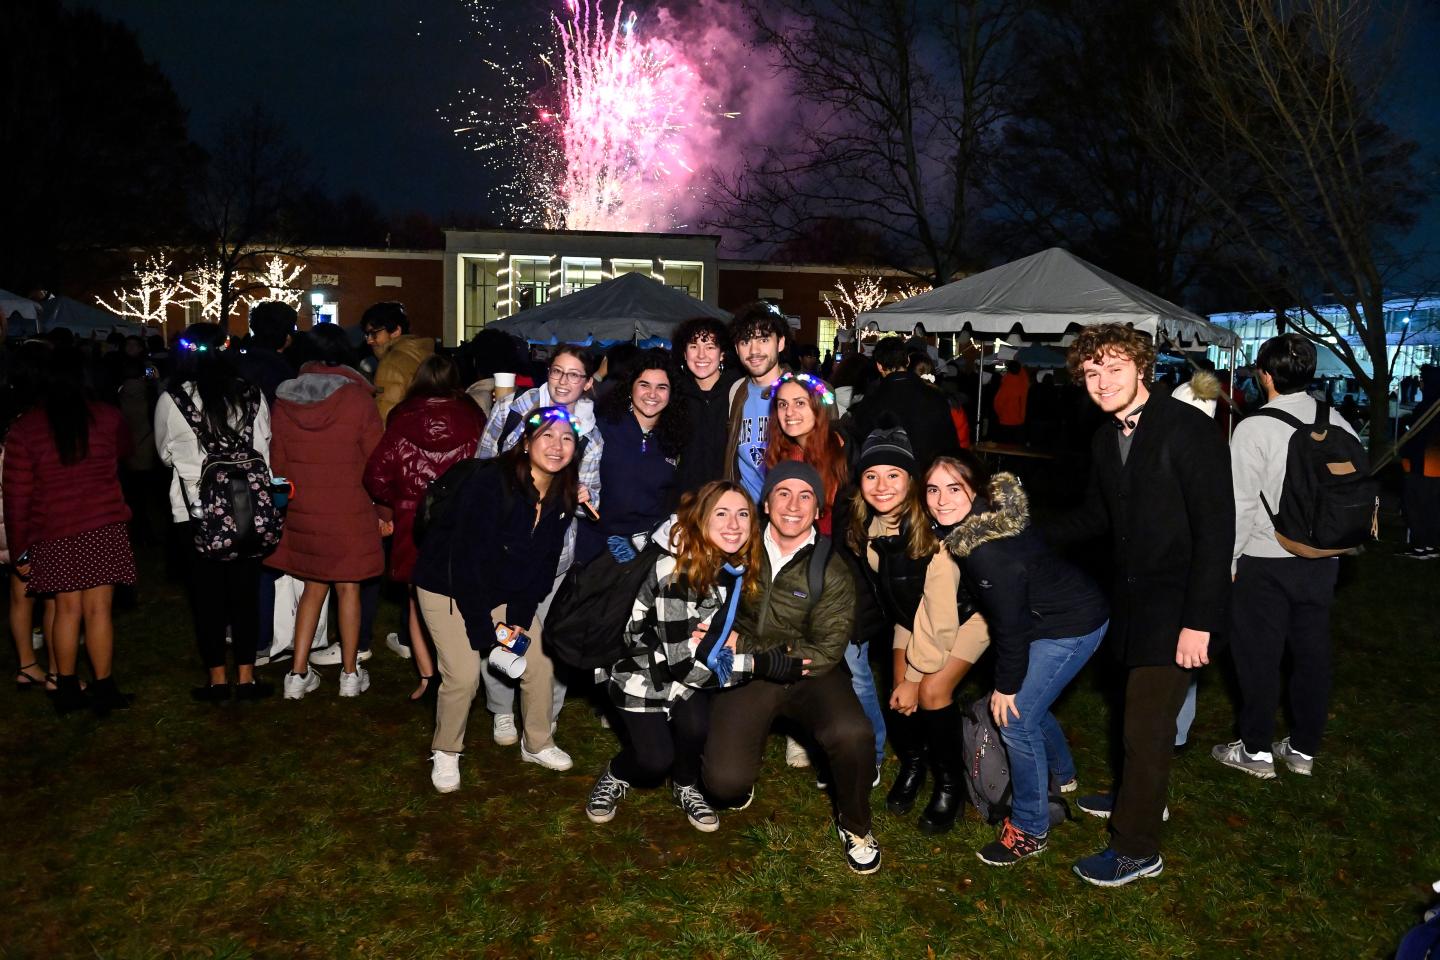 A group of students pose for a photo while fireworks burst in the background